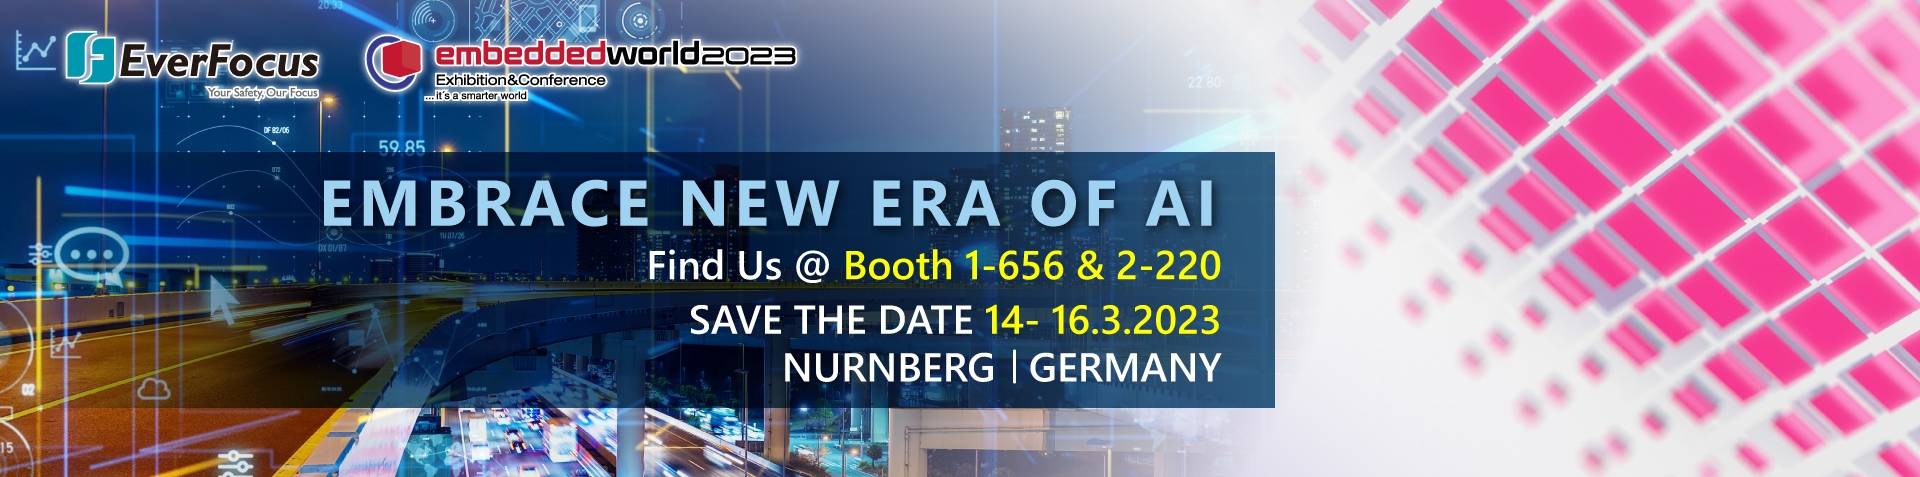 Join EverFocus to Embrace AI at Embedded World 2023